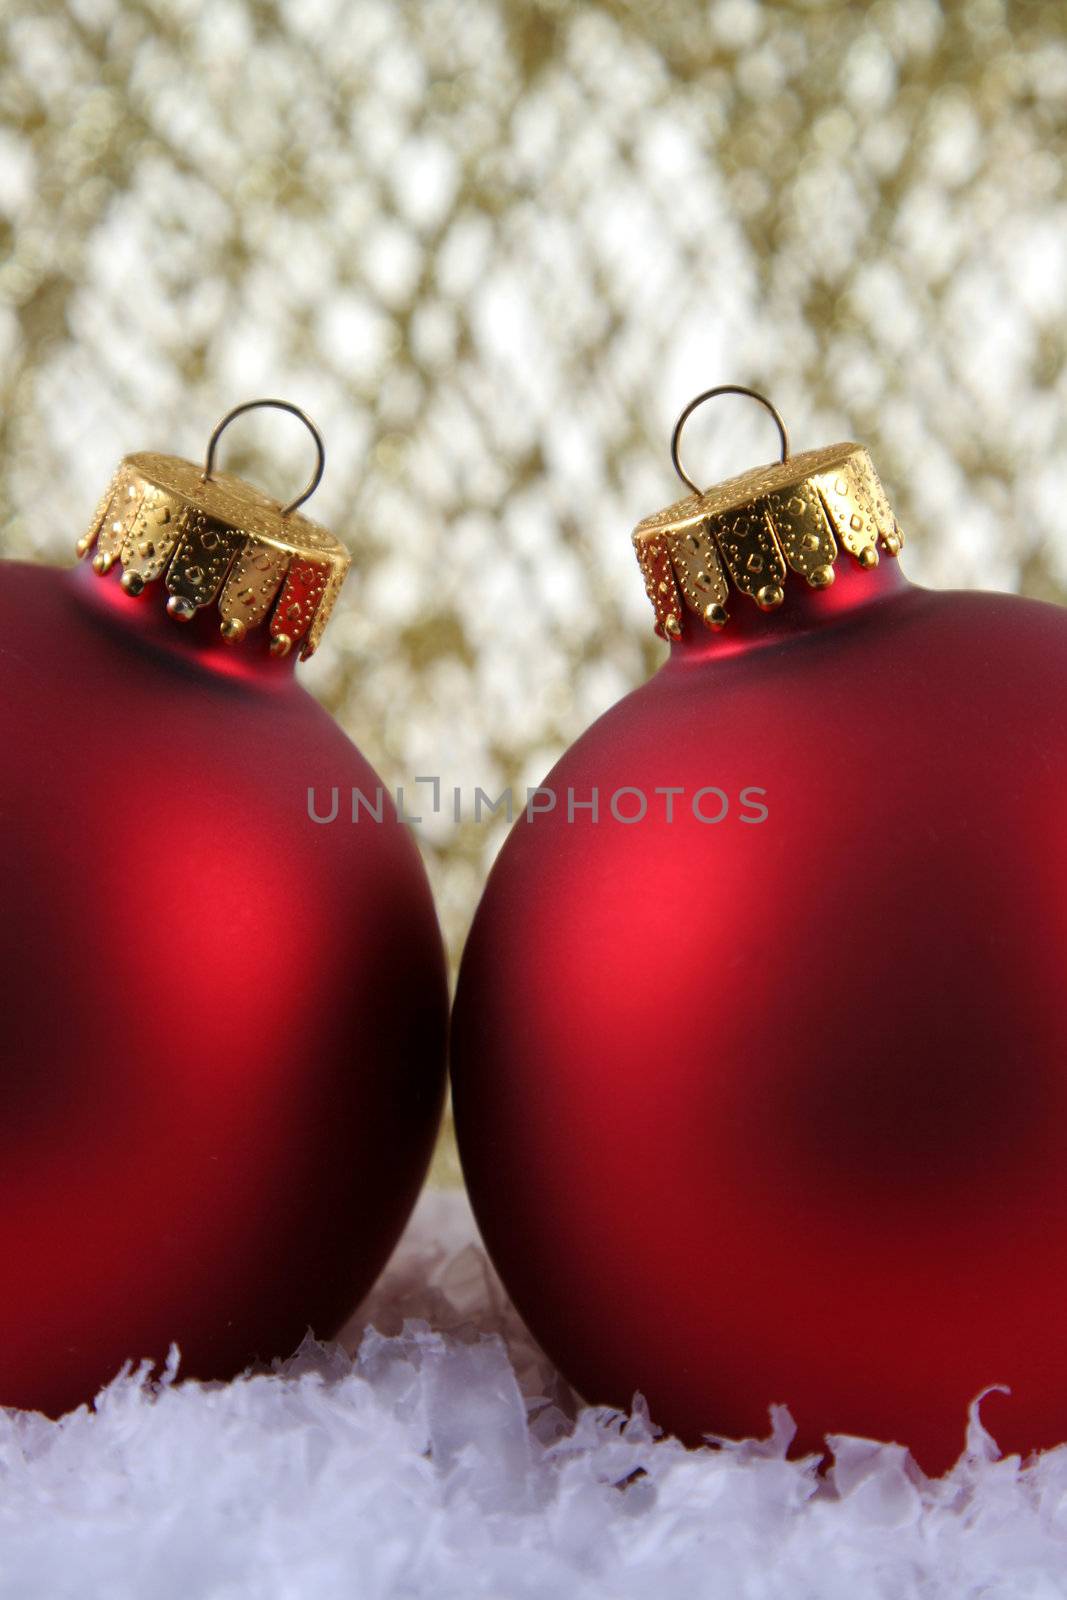 Two Red Xmas Baubles
 by ca2hill